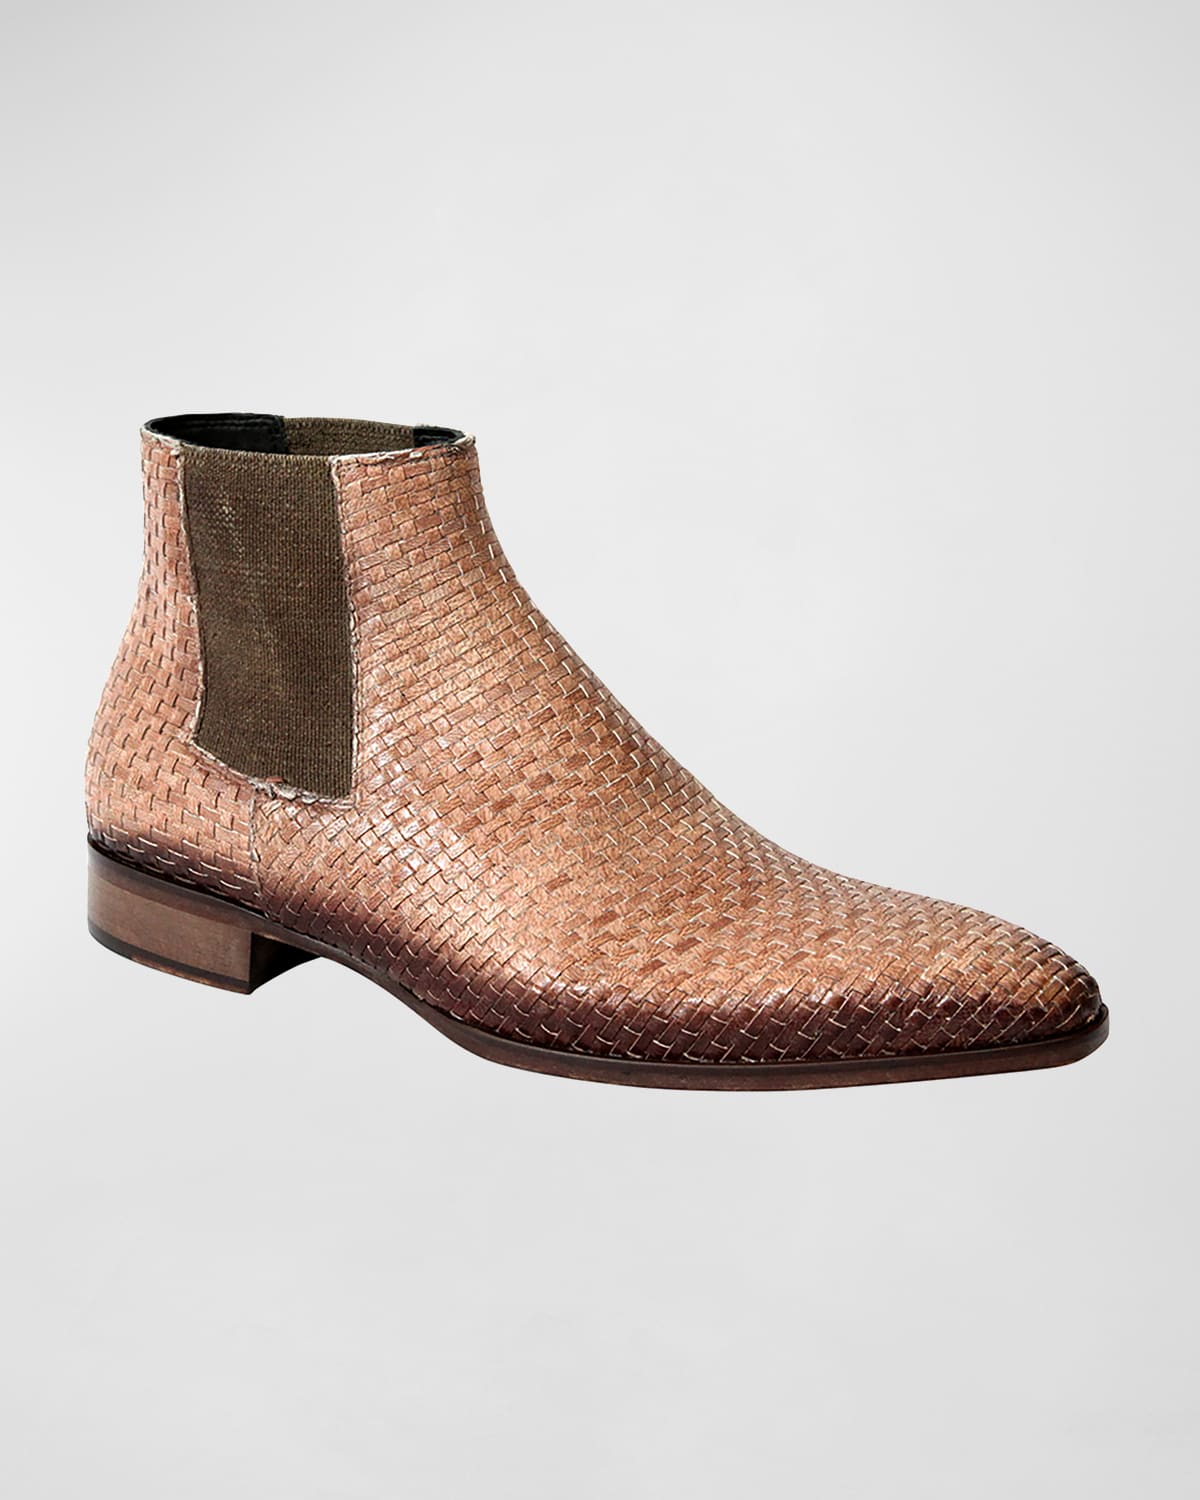 Jo Ghost Men's Burnished Woven Chelsea Boots